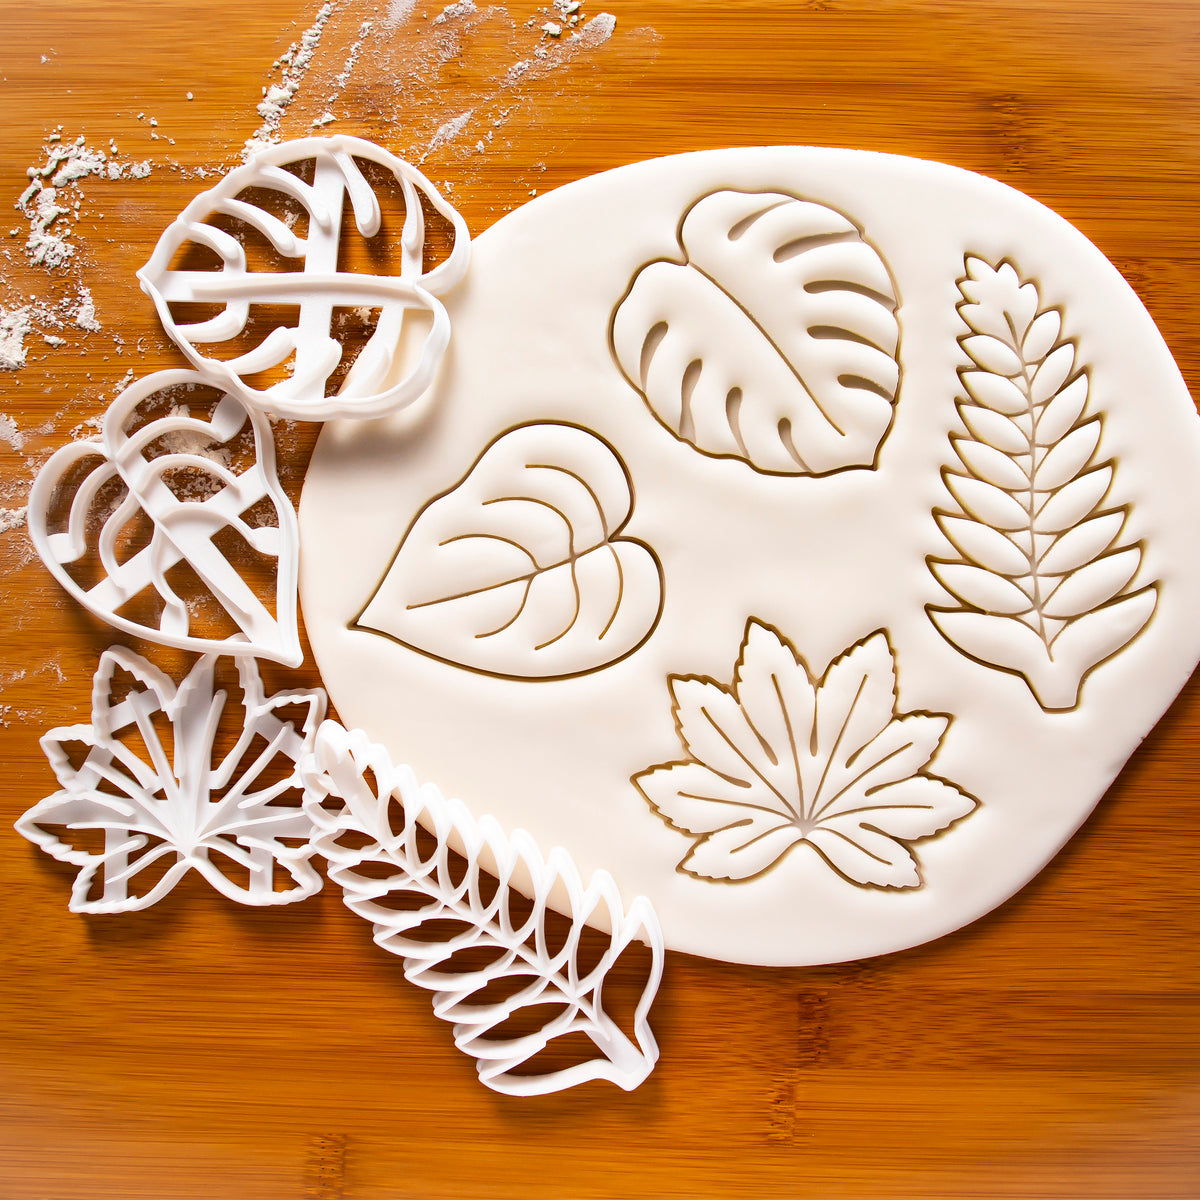 Monstera (Swiss Cheese Plant), Fern, Devil's Ivy, and Japanese Aralia (Paperplant) cookie cutters